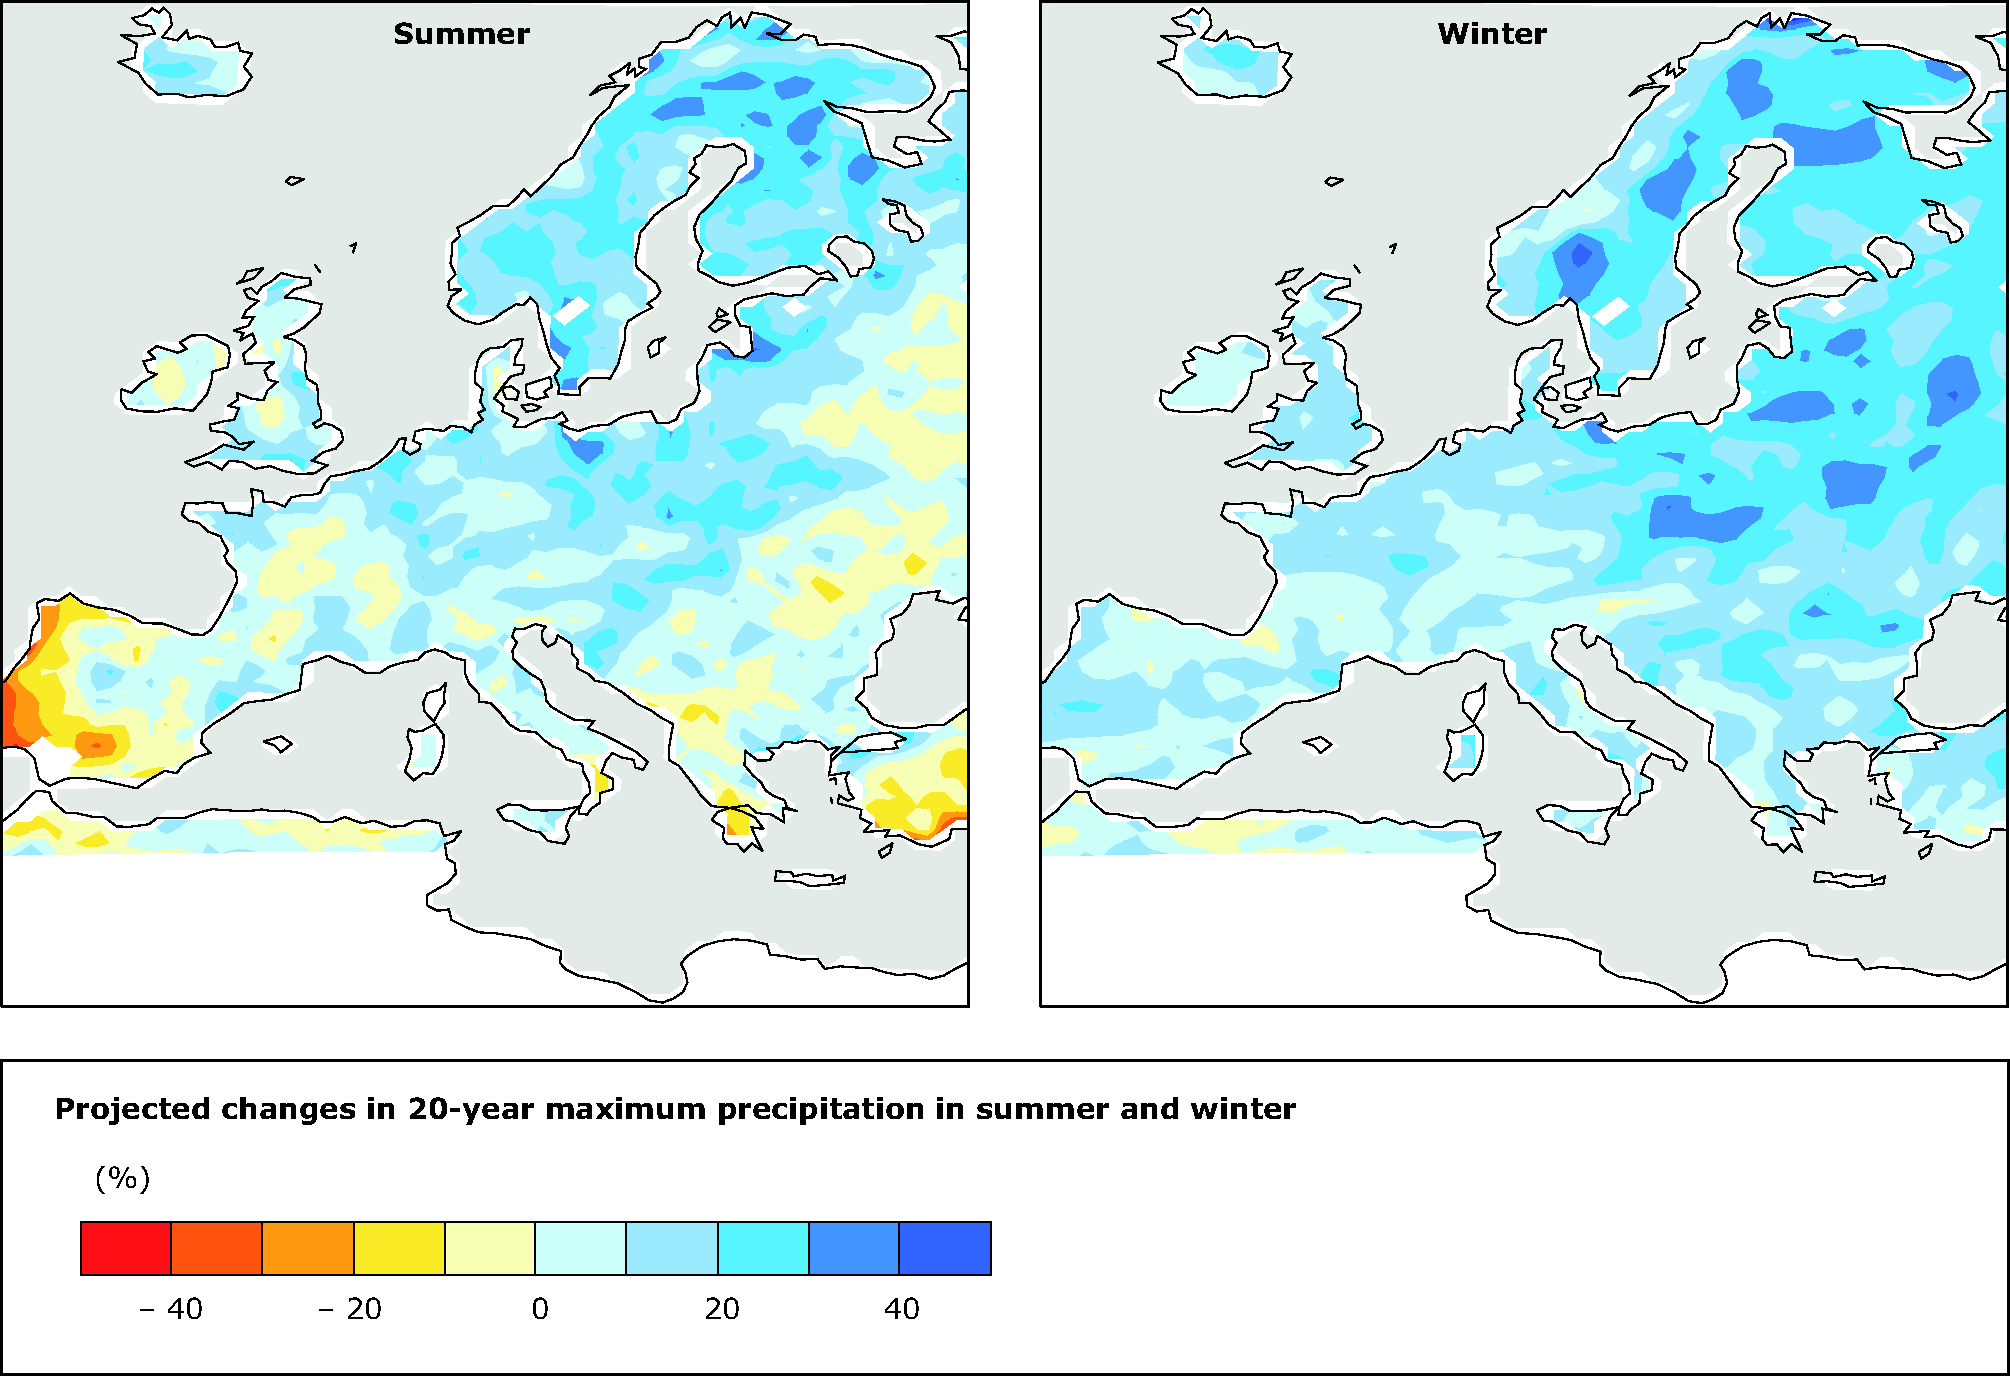 Projected changes in 20-year maximum precipitation in summer and winter